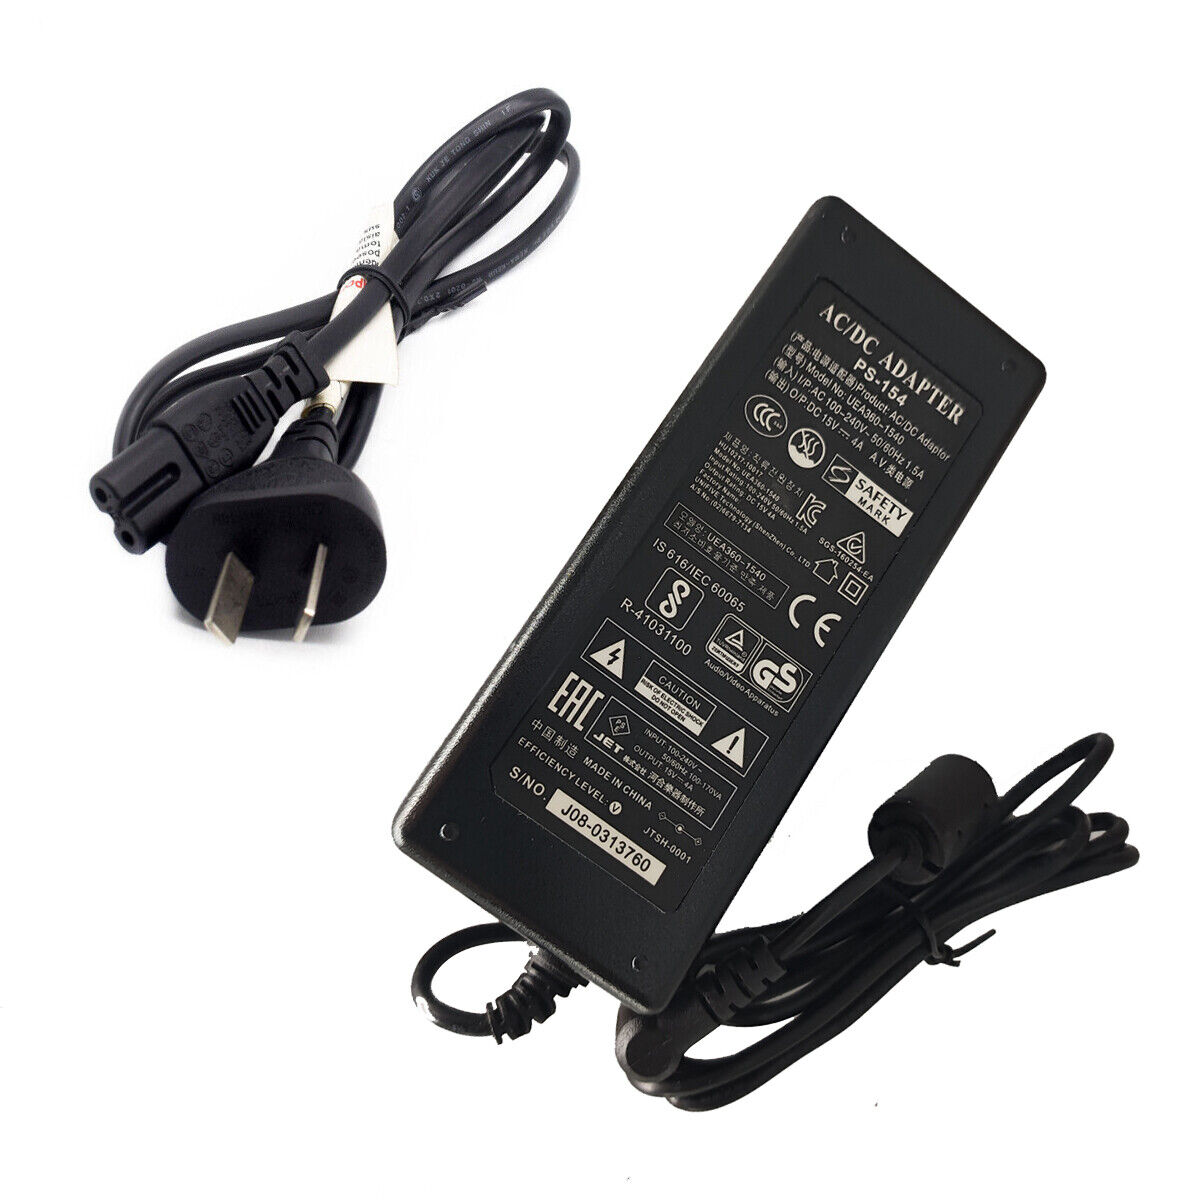 15V 4A AC Adapter for Kawai PS-154 Power Supply Cord Charger Input: 100-240V 50/6OHz Output: 15V 4A Package included - Click Image to Close